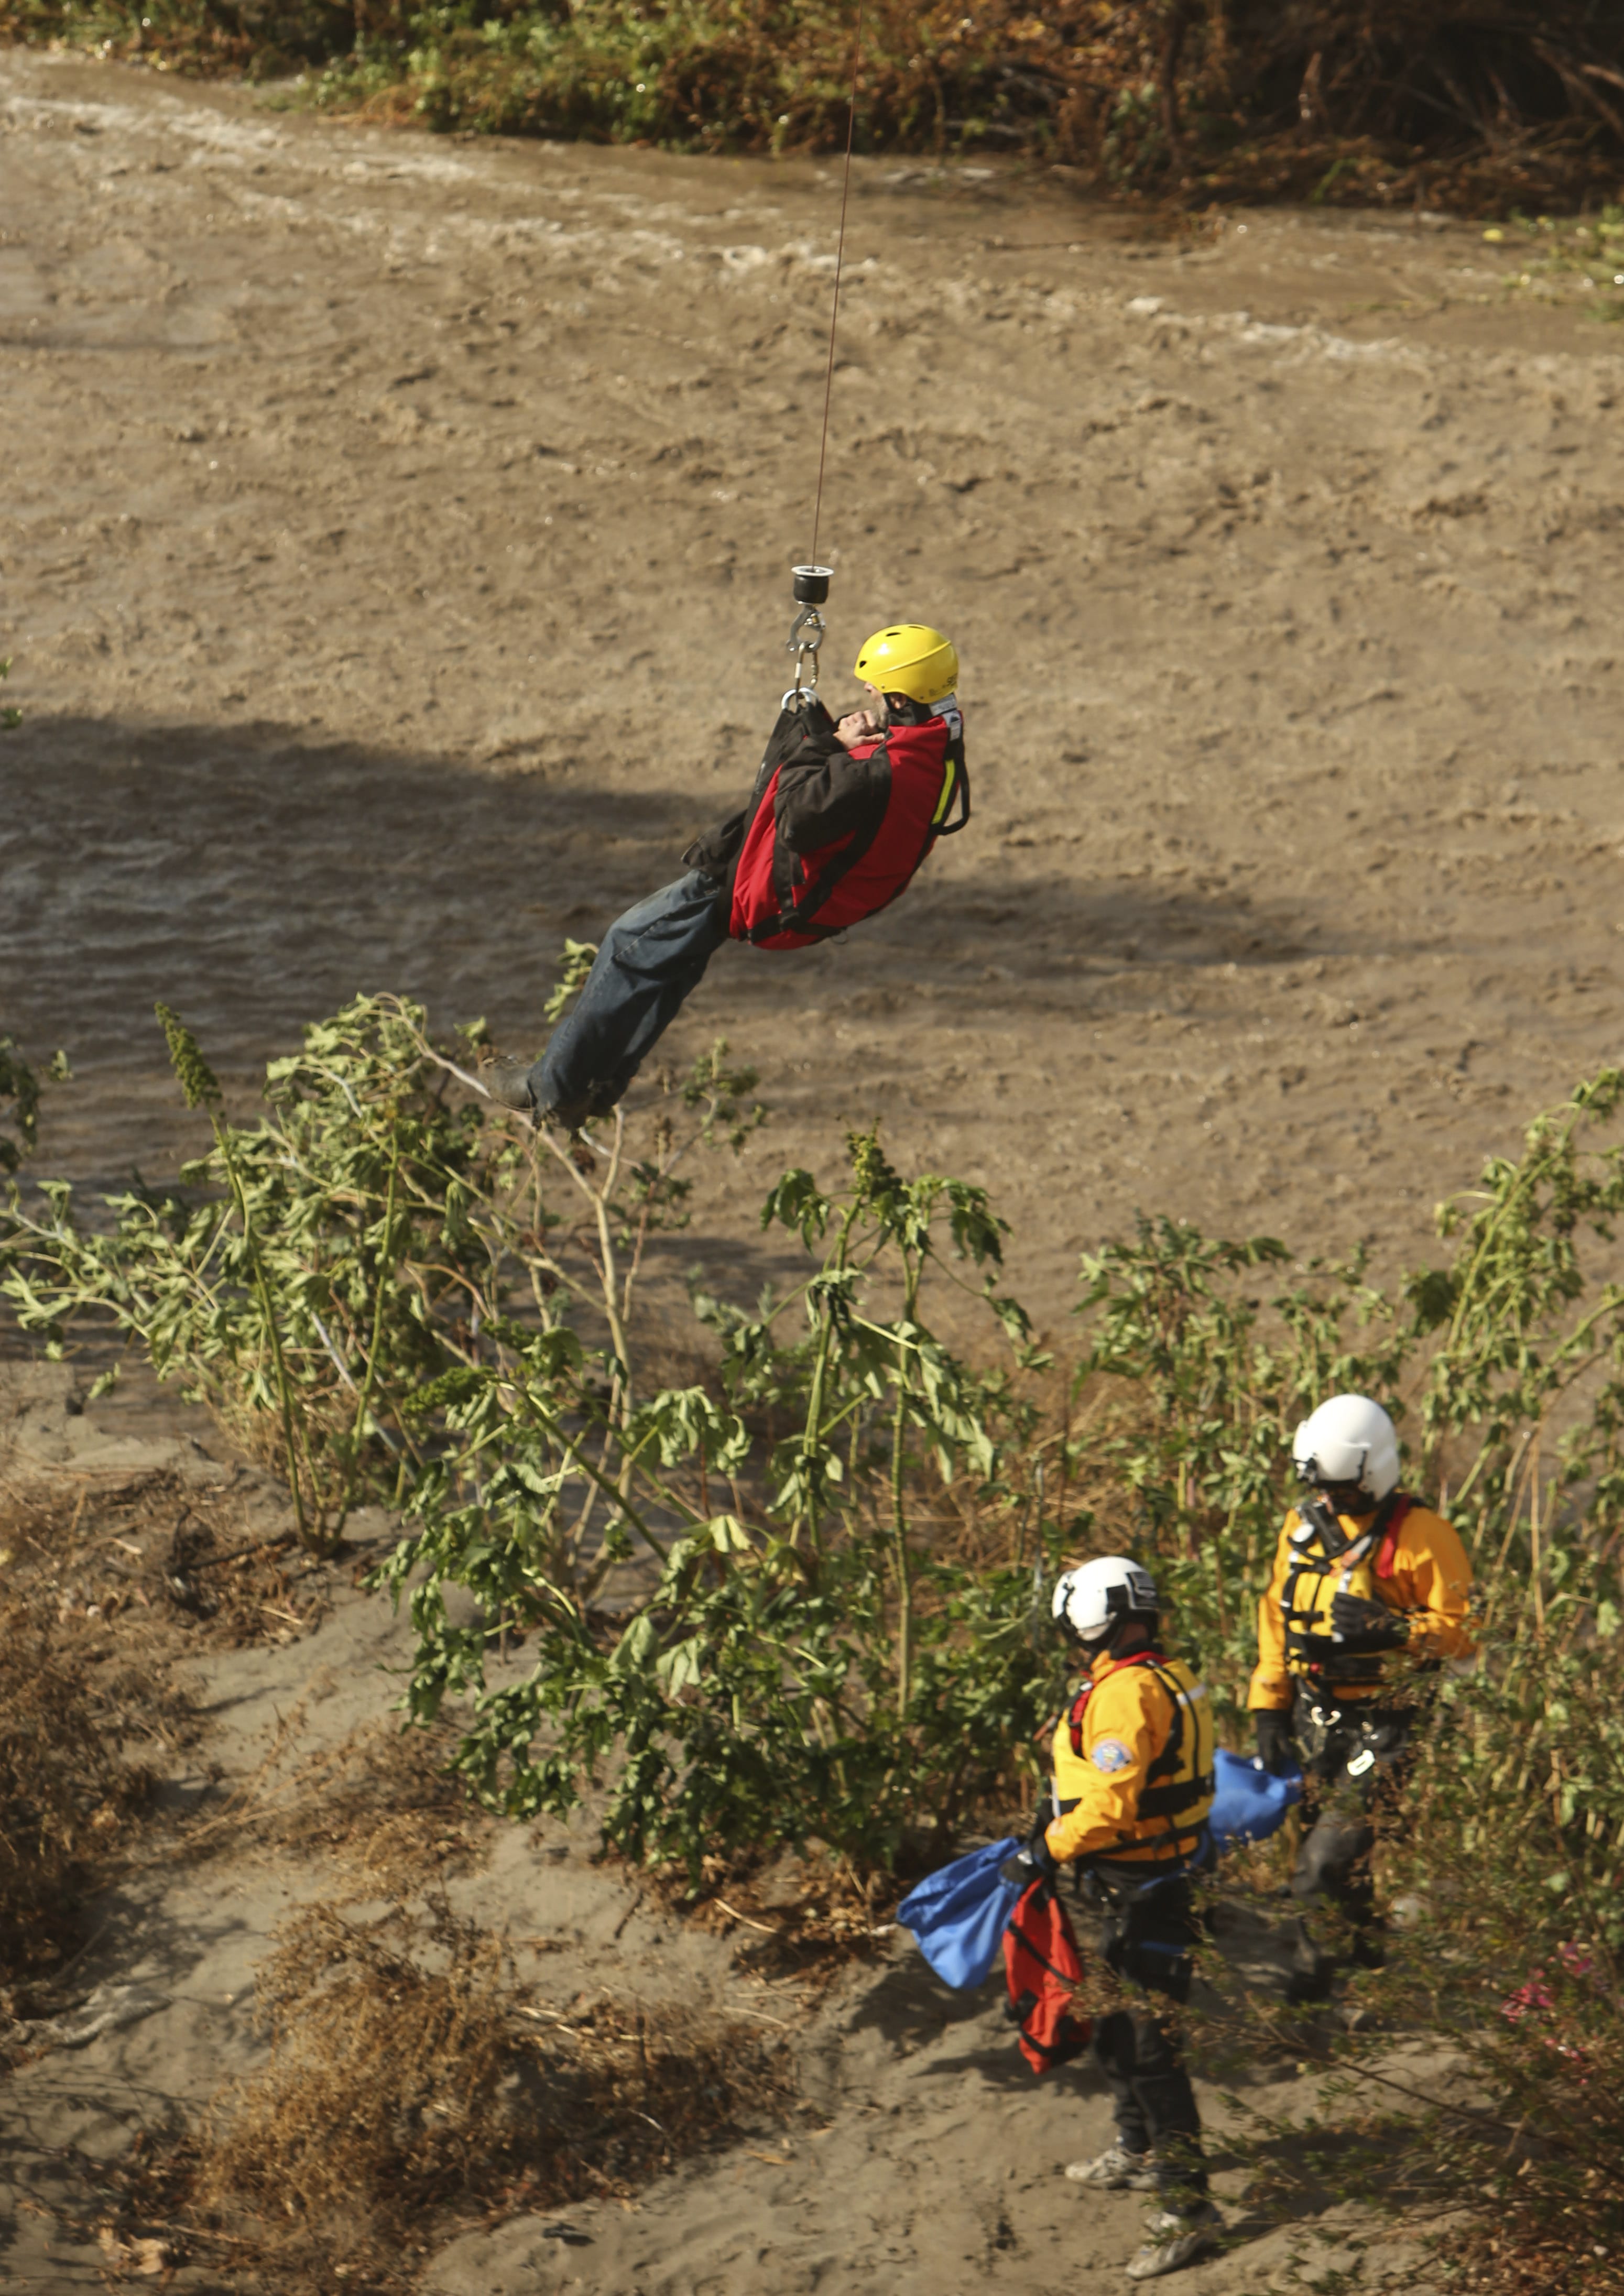 A man is hoisted out with the help of a San Bernardino County Sheriff's helicopter on Tuesday, Jan. 9, 2018, in the Santa Ana River and near the borders of Rialto, Colton, and Riverside, Calif. Three people and a dog were rescued by a helicopter after large amounts of rain fell, trapping the group at a homeless encampment in the river.